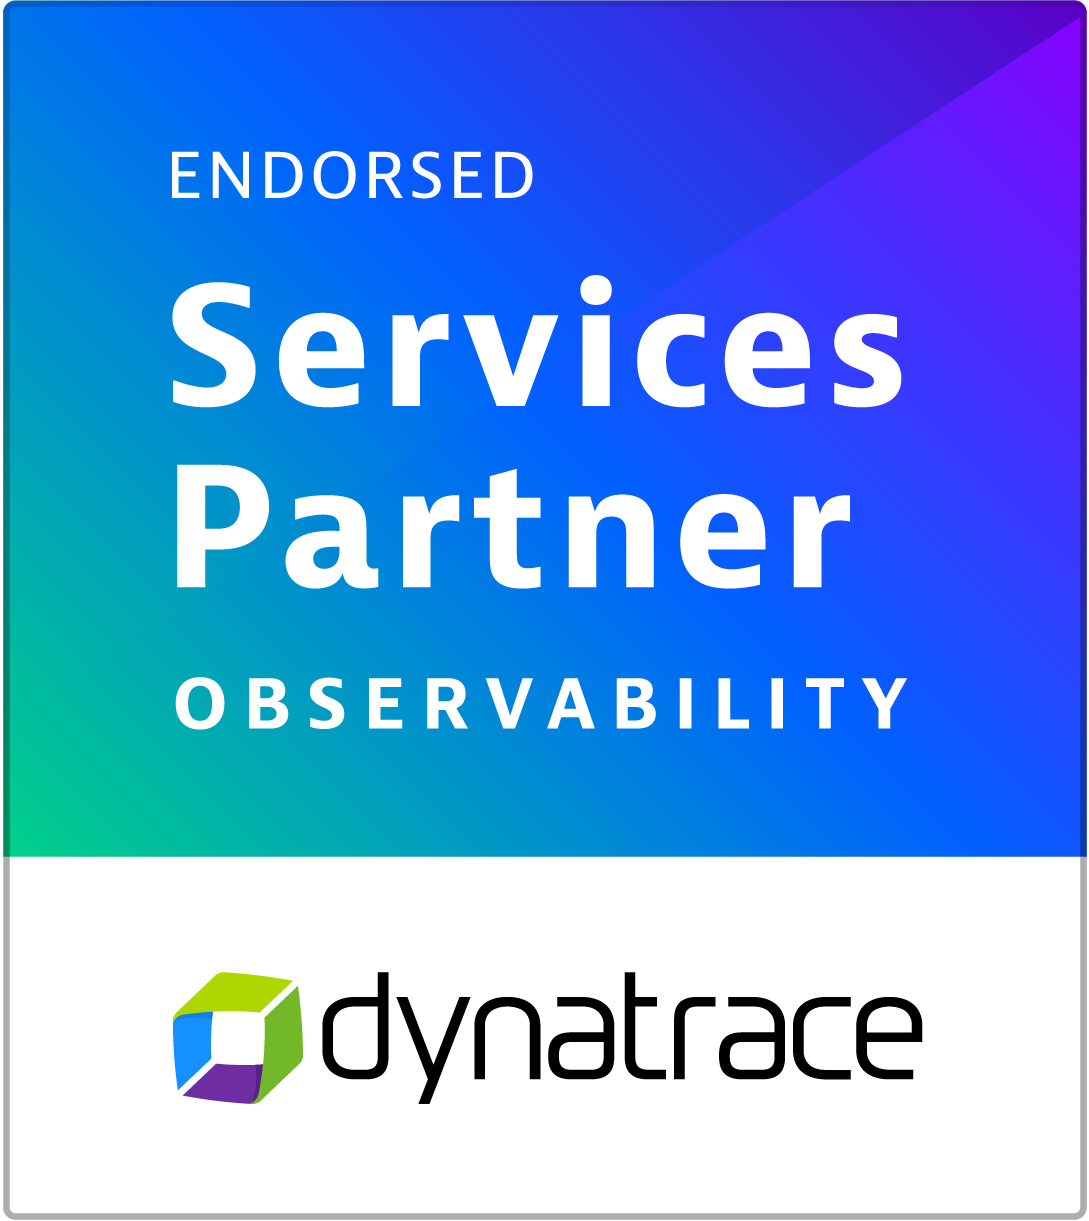 Omnilogy is an endorsed service Partner from Dynatrace